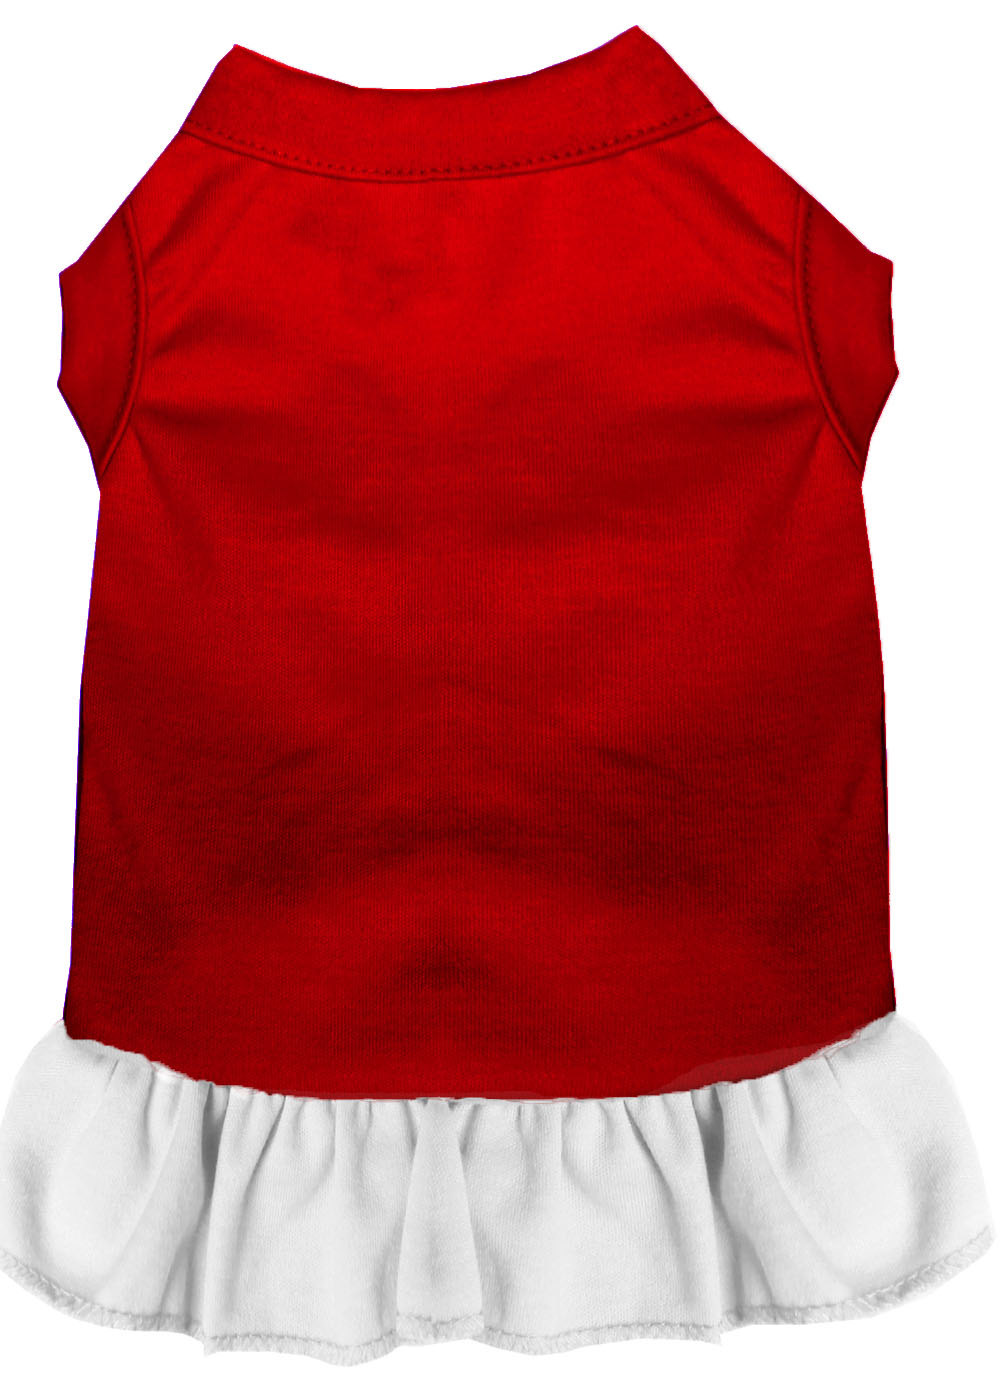 Plain Pet Dress Red with White 4X